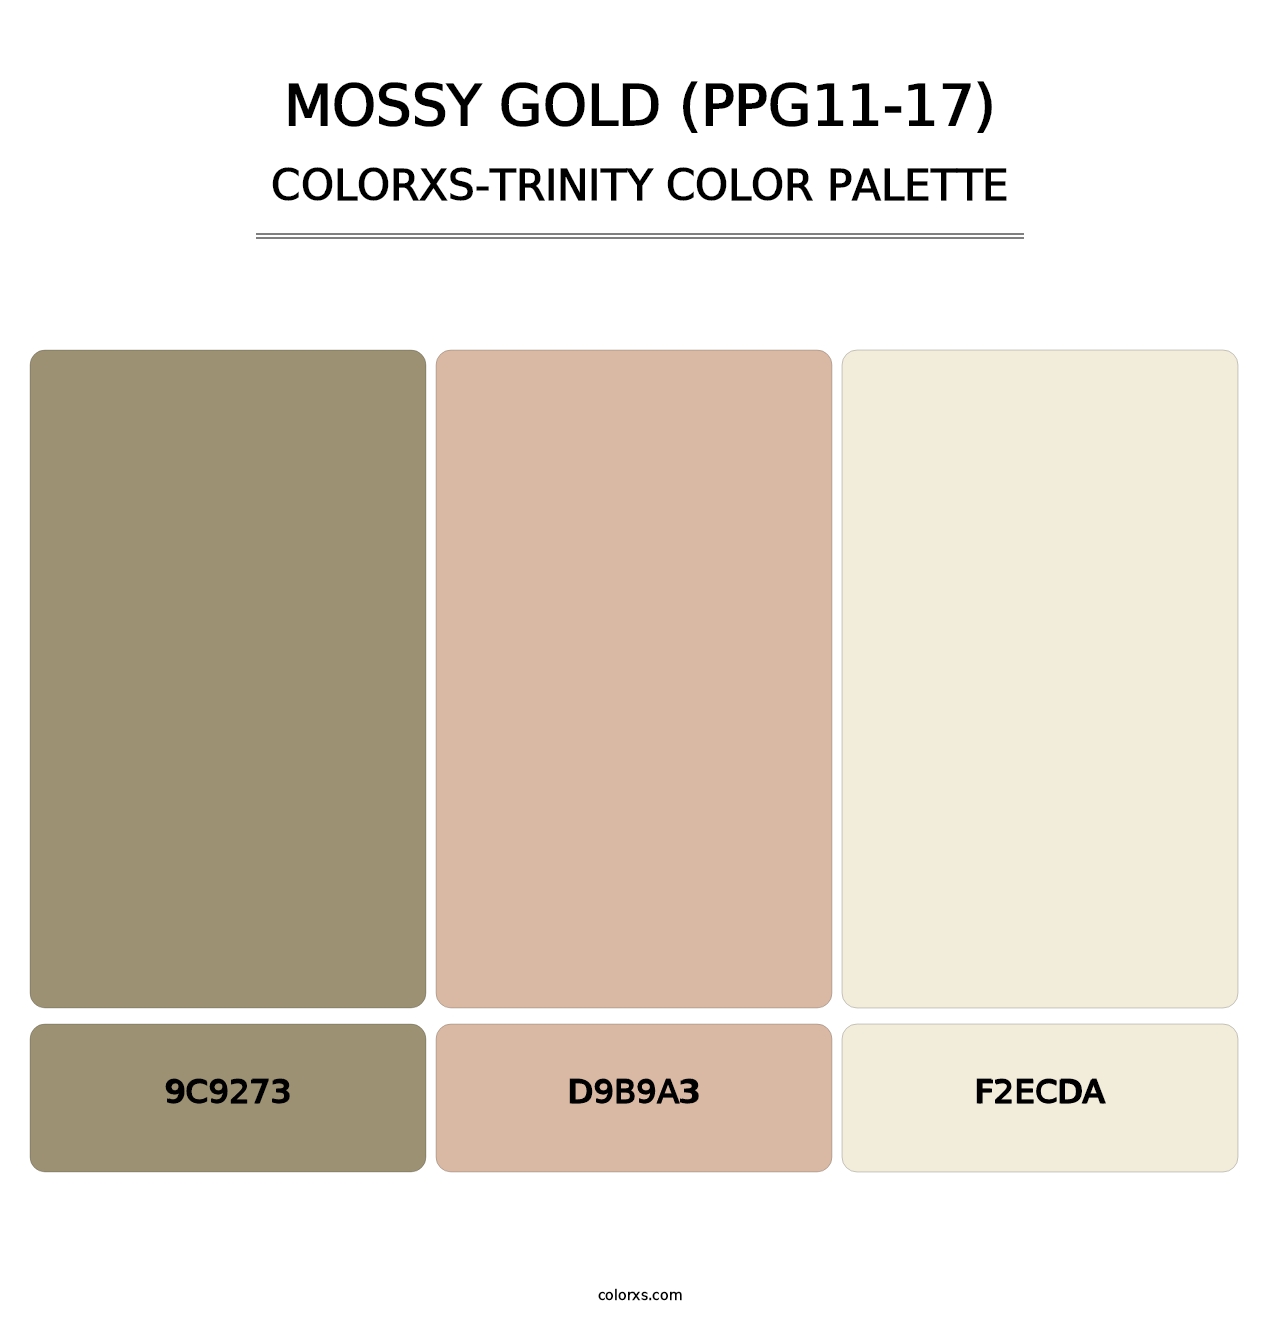 Mossy Gold (PPG11-17) - Colorxs Trinity Palette